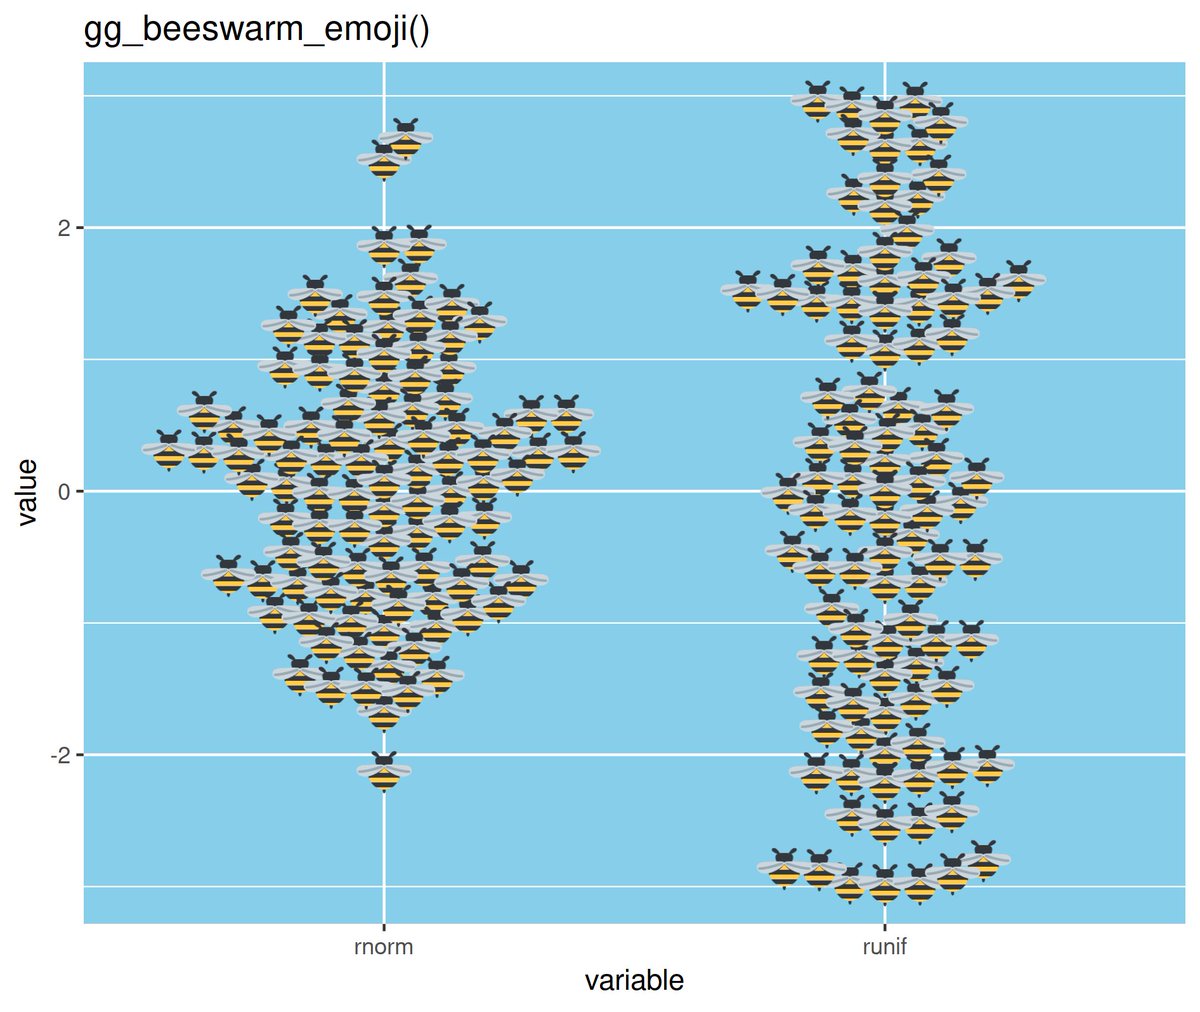 Duncan's original plot, showing emoji bees used as points so that the whole cloud of points looks like a beeswarm.